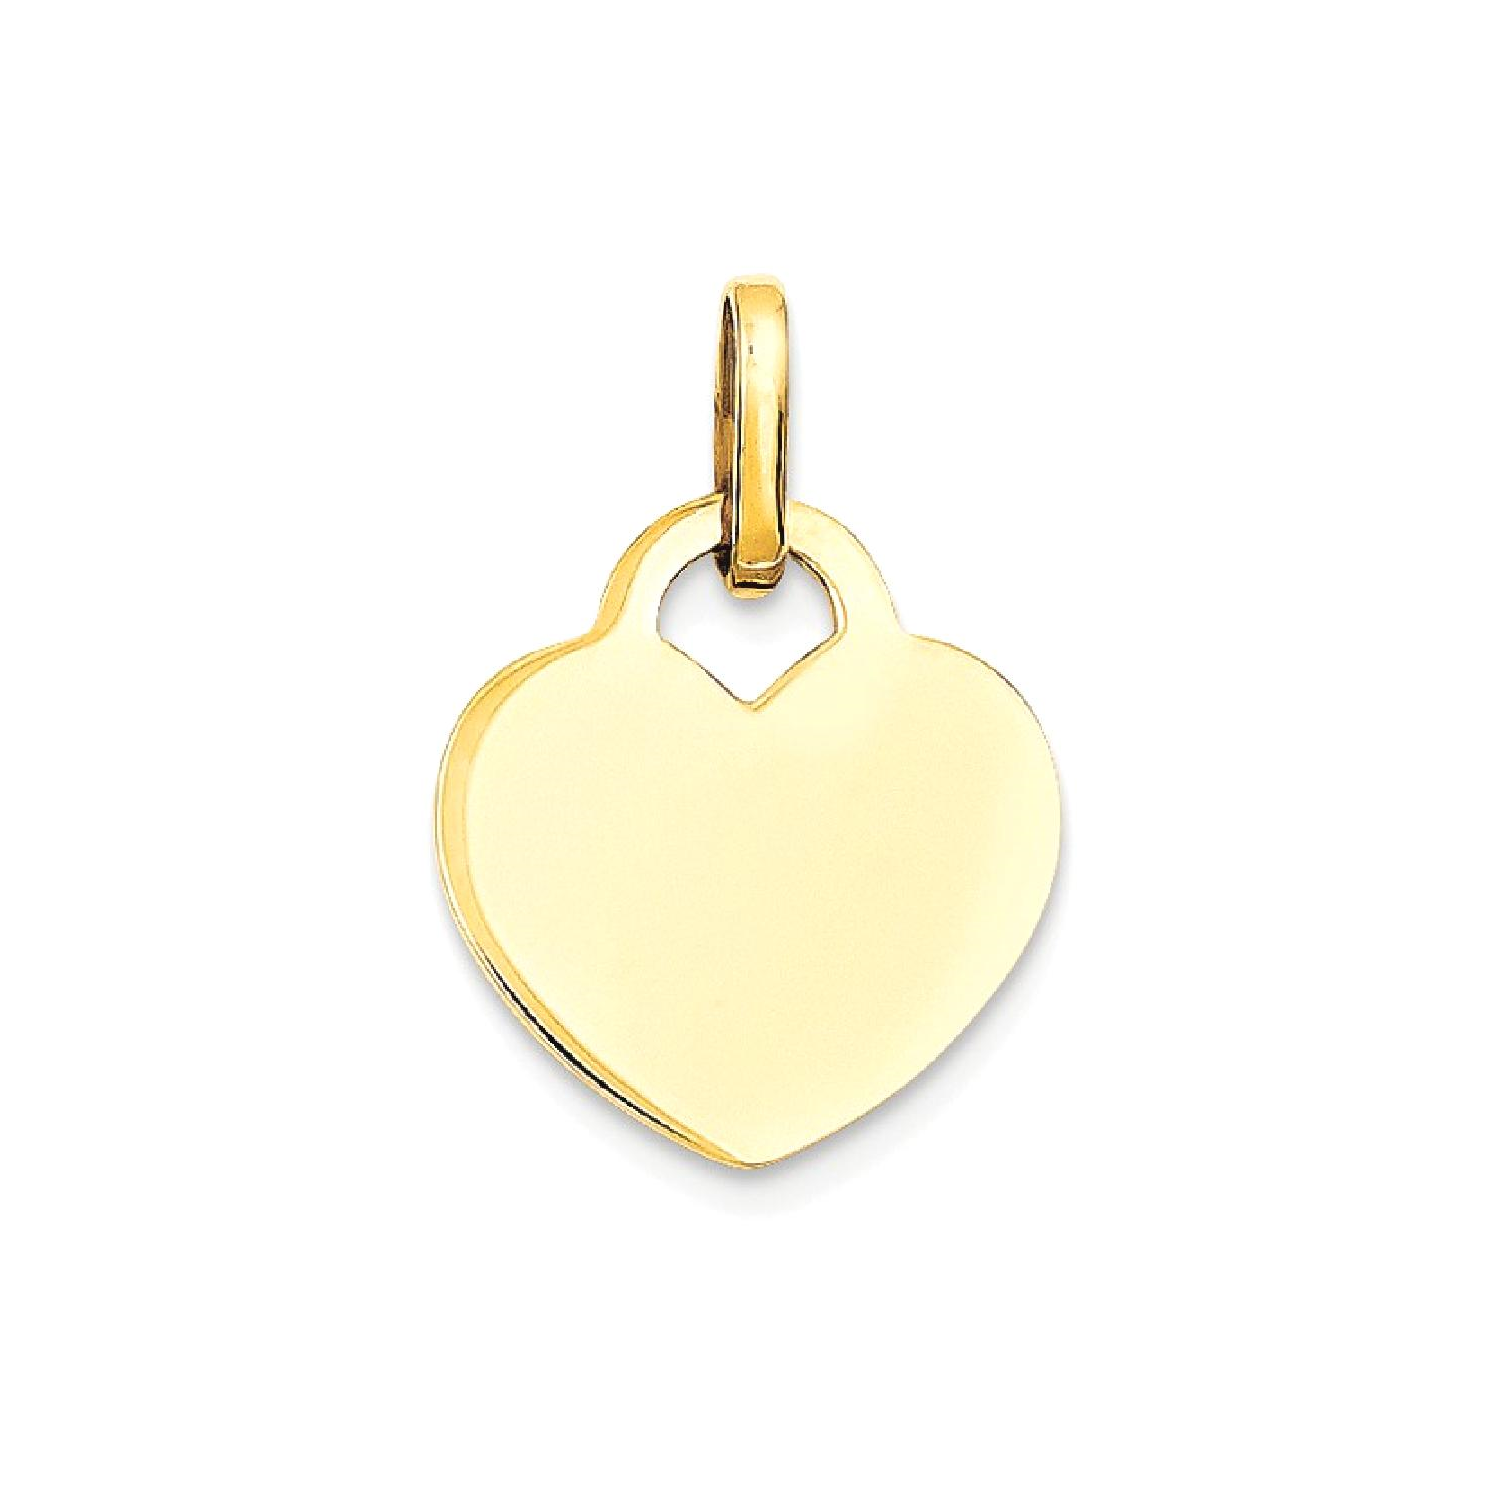 Details about   14K Yellow Gold Heart with Awareness Ribbon Charm Pendant MSRP $357